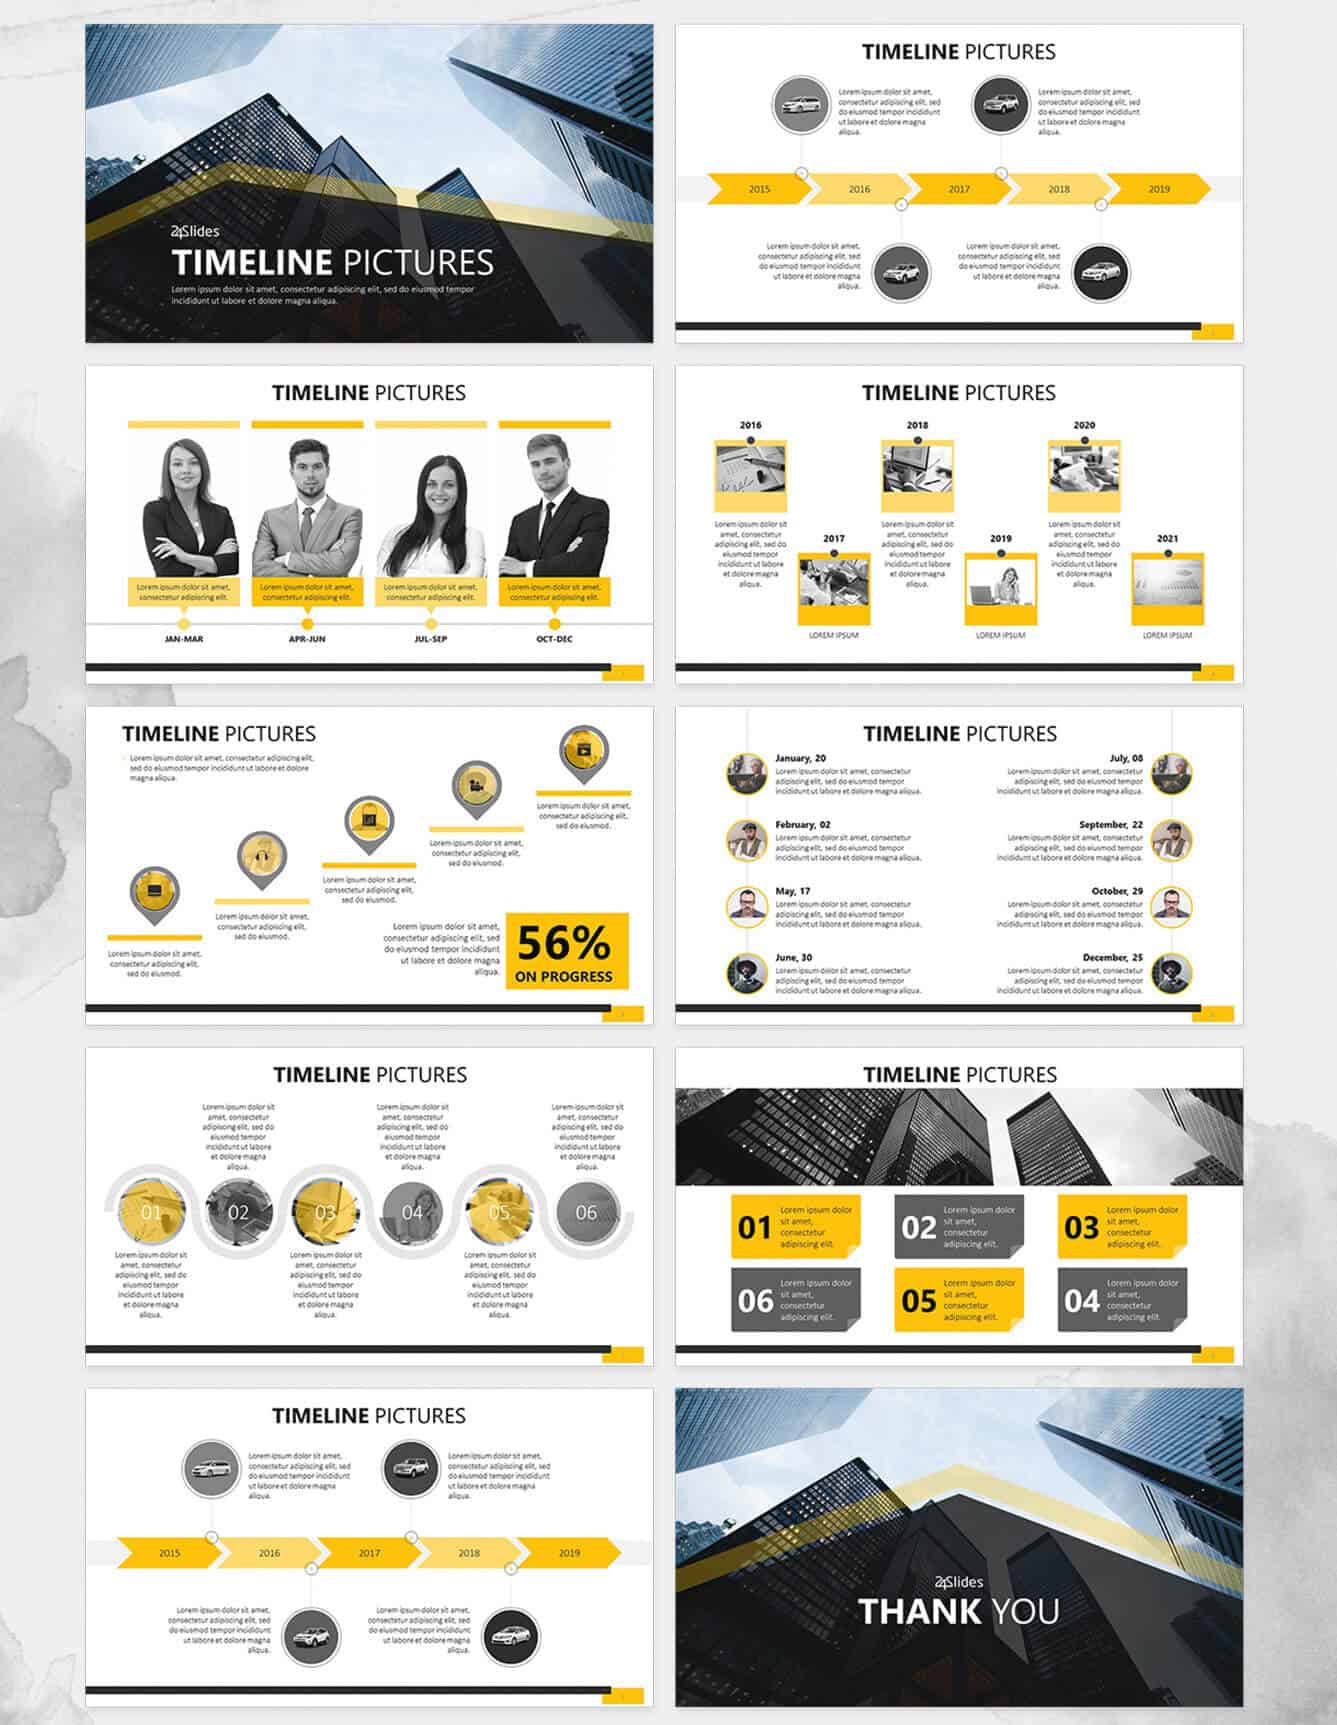 24Slides.com's Timeline Pictures PowerPoint Template Pack